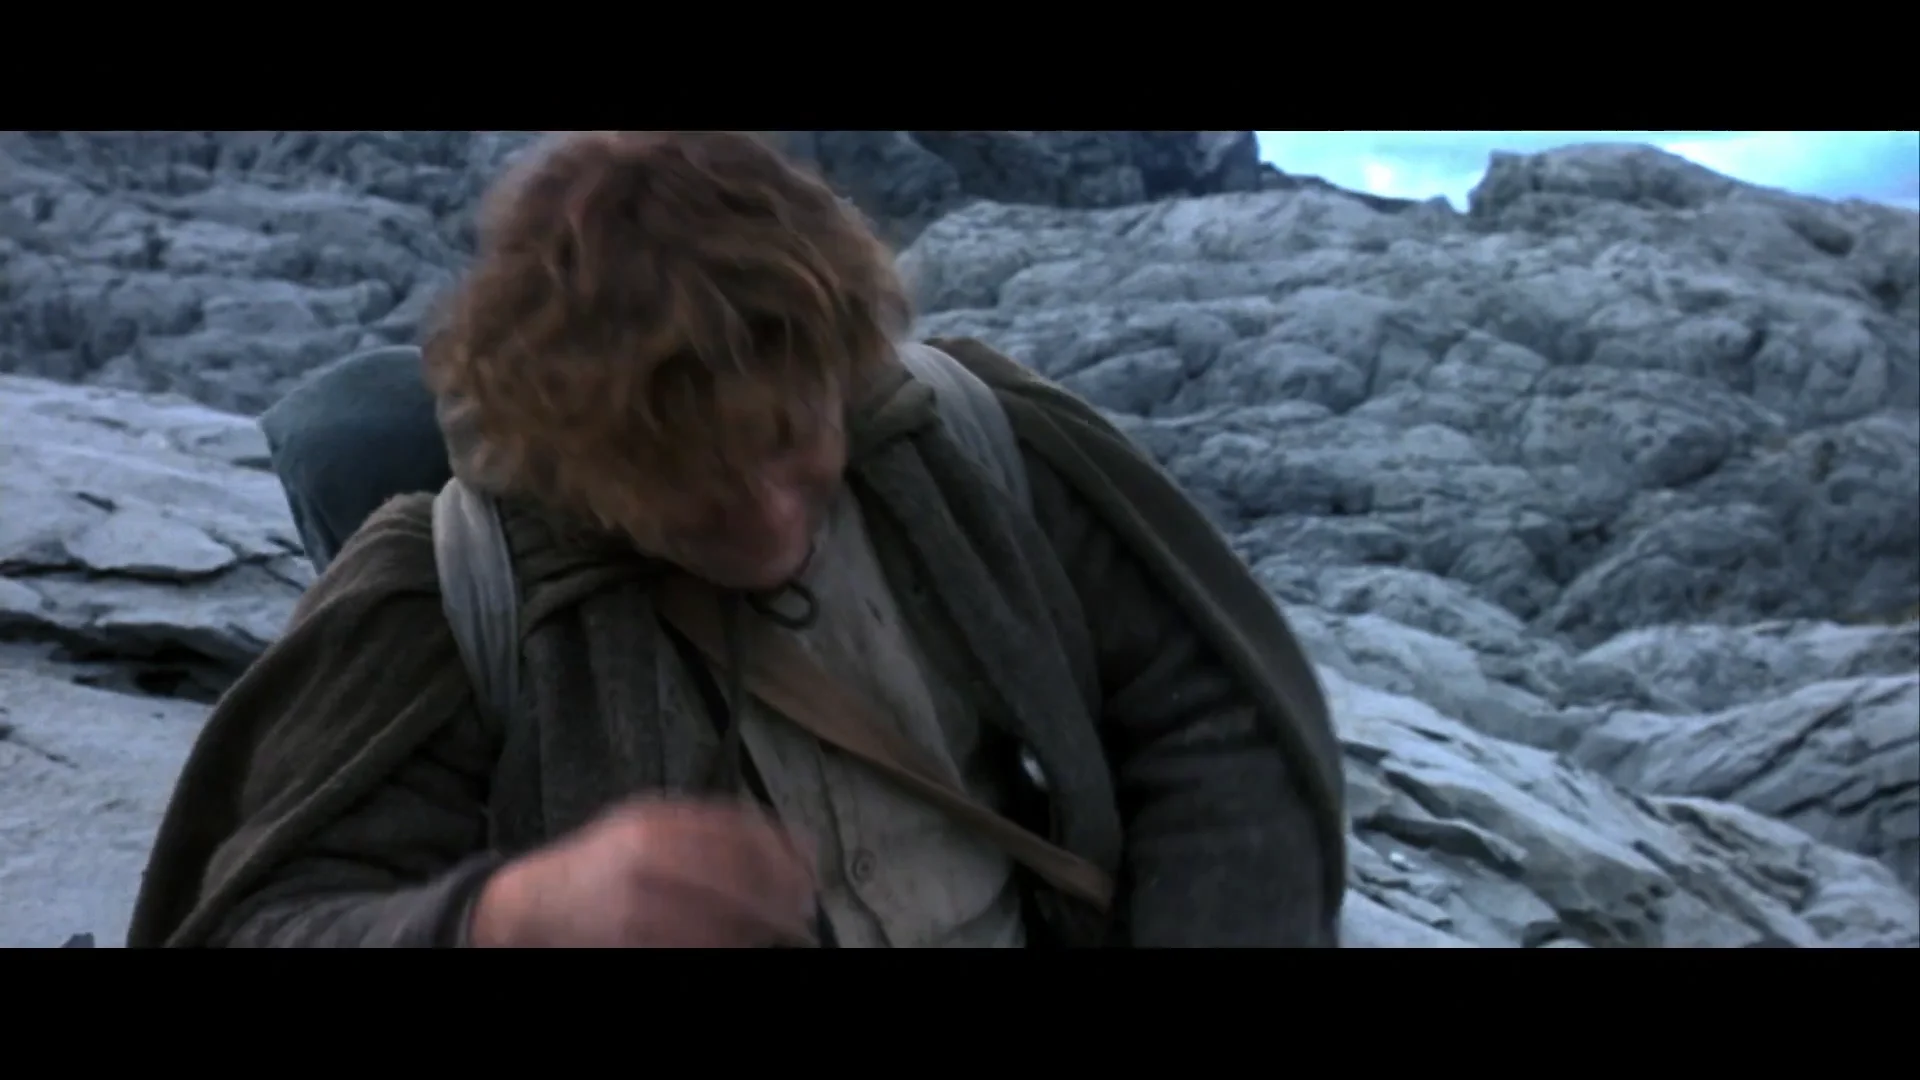 Lord of the Rings: Fellowship of the Ring (Trailer) on Vimeo